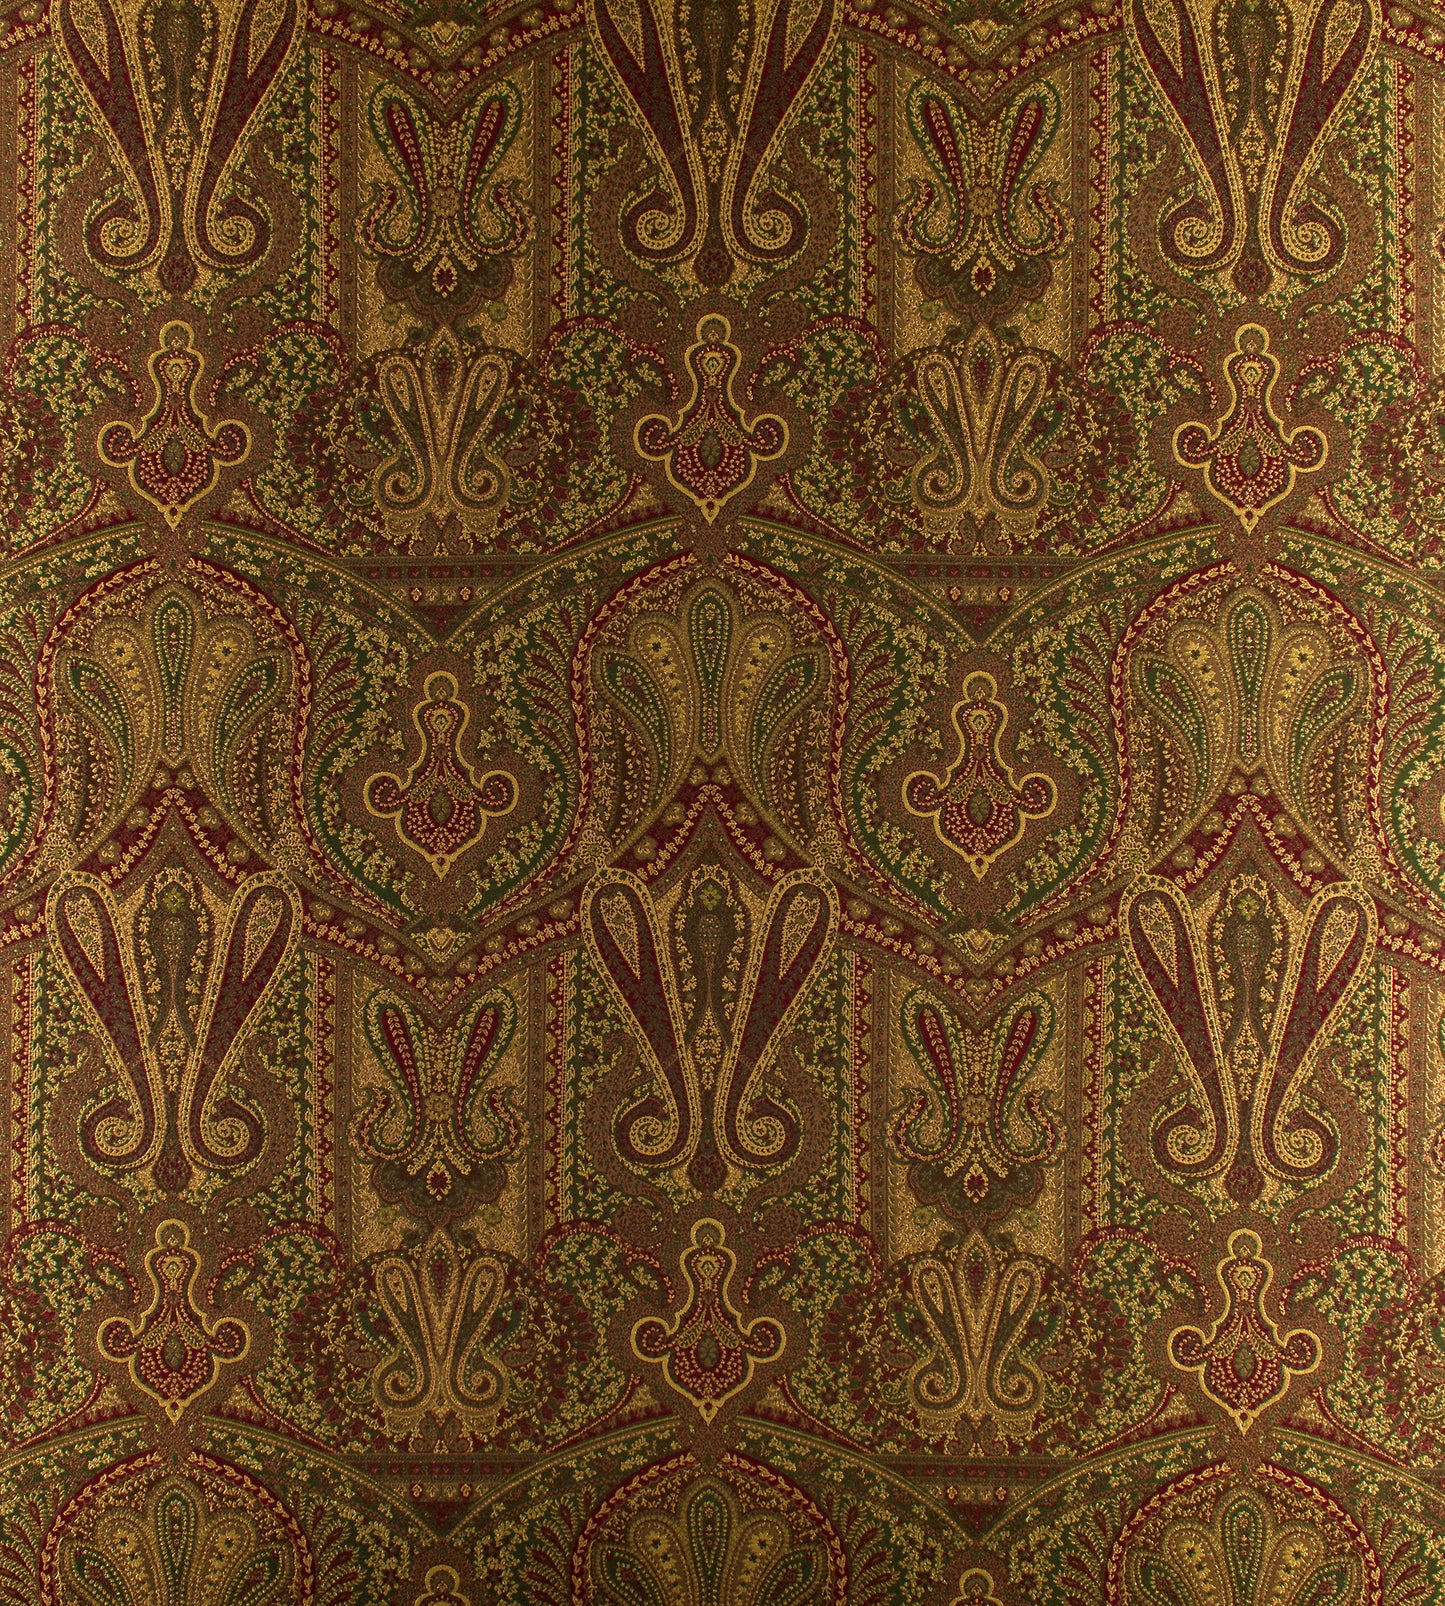 Purchase Old World Weavers Fabric Product SB 00960343, Cachemire Persiano Marrone 3